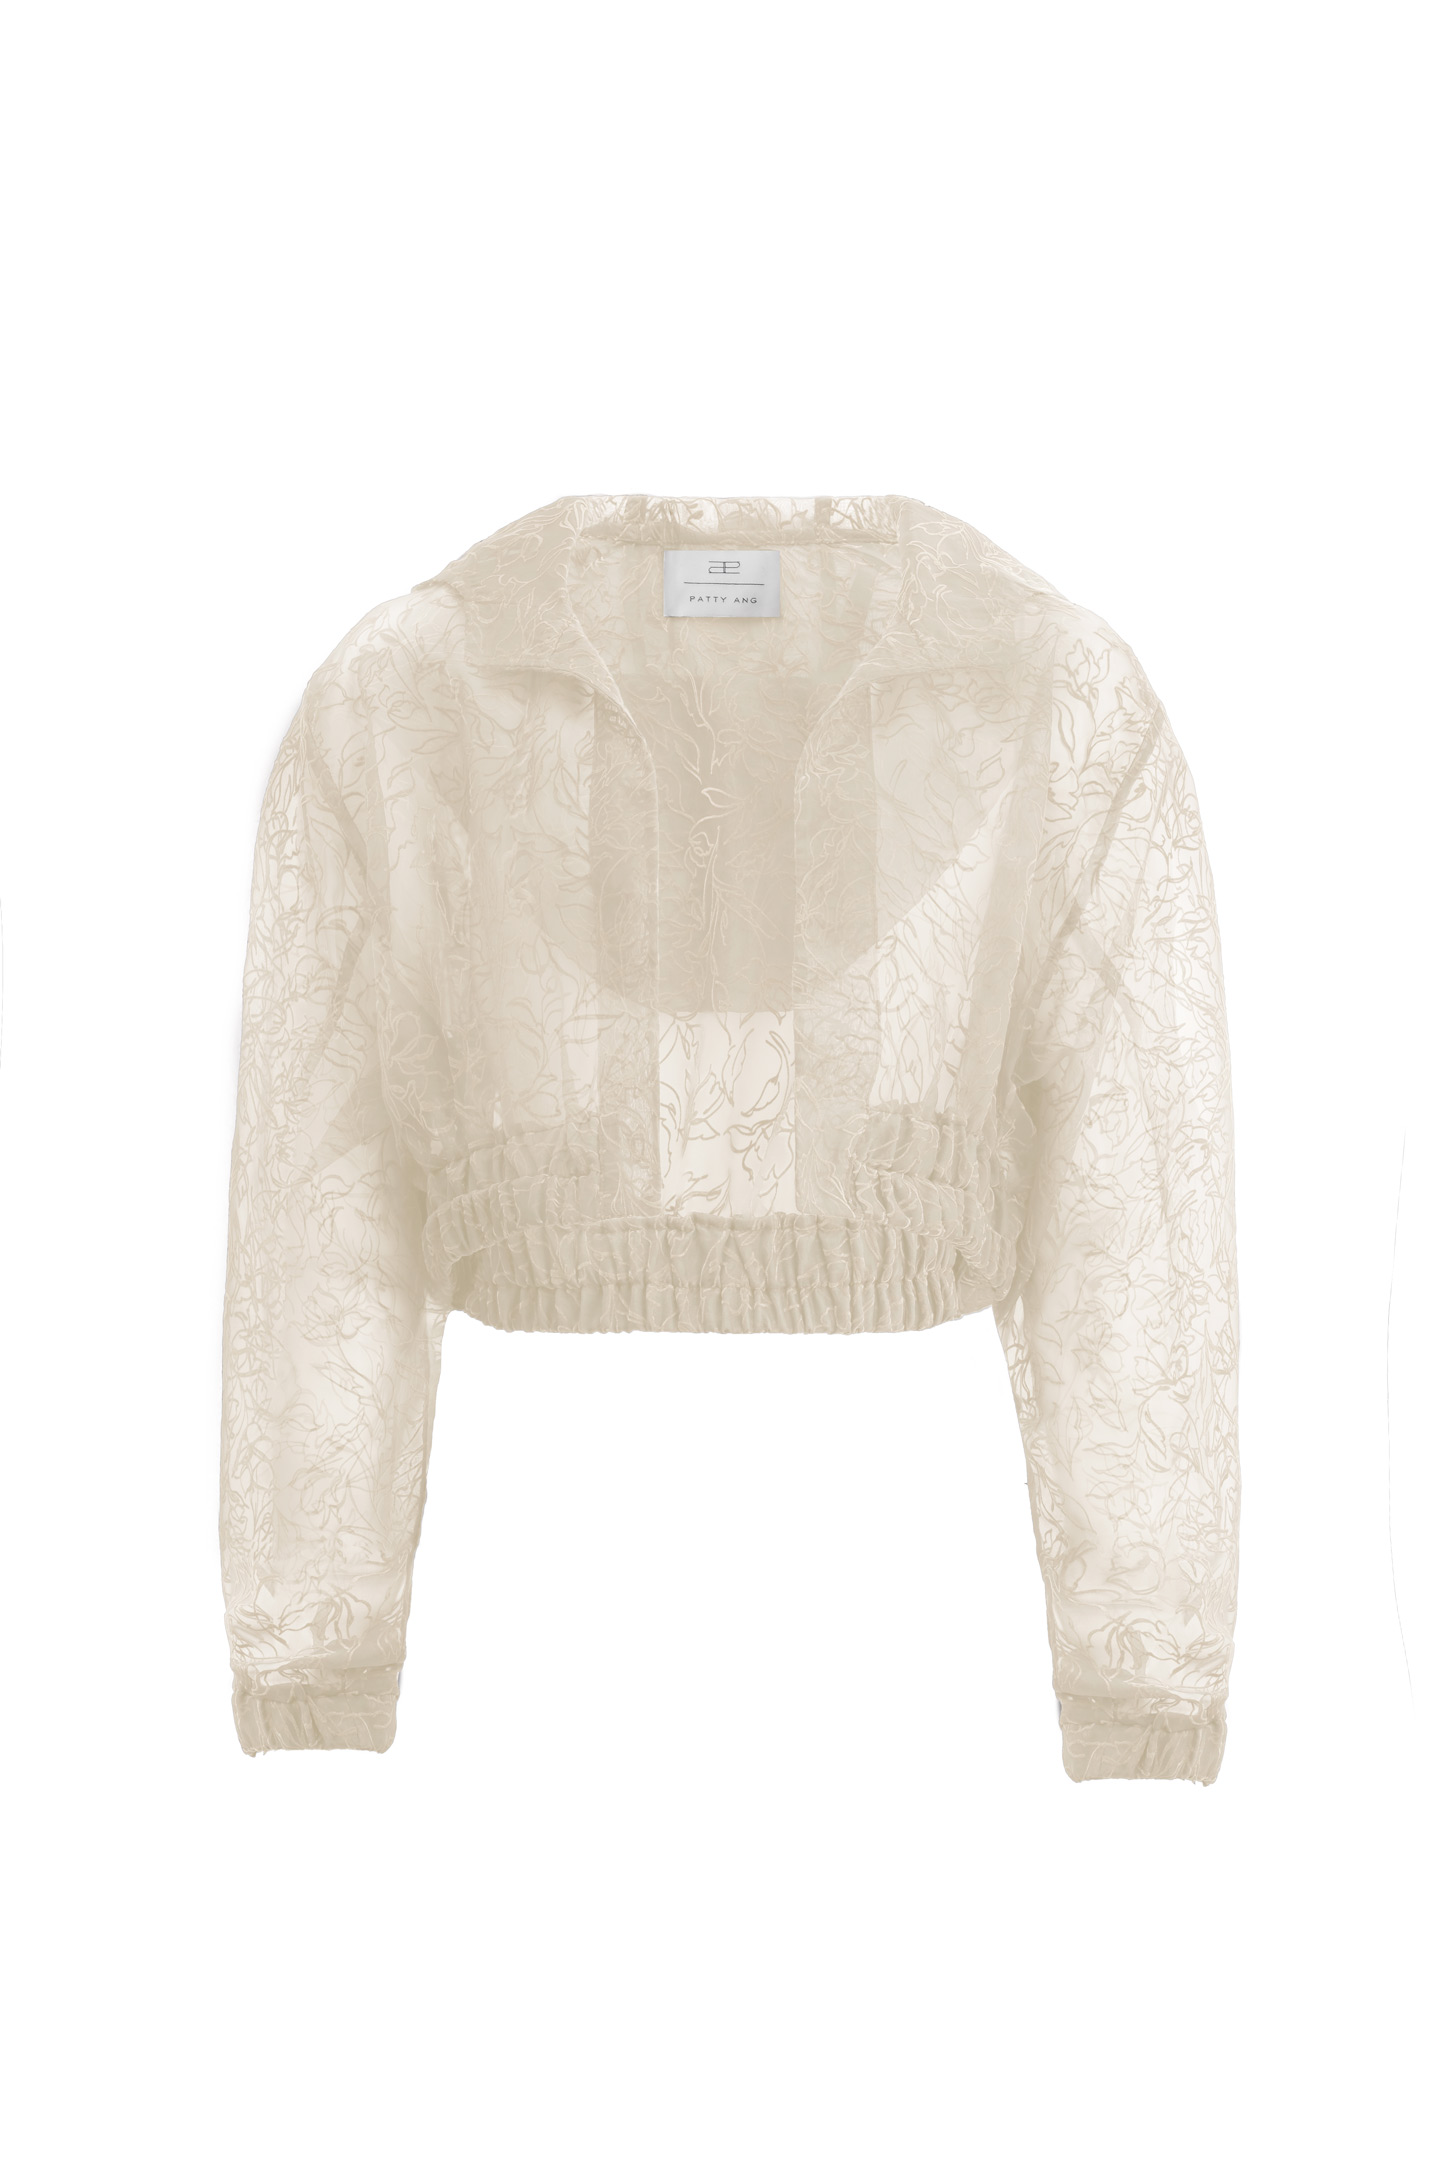 The Cropped Humphrey in Ivory - Atelier Patty Ang